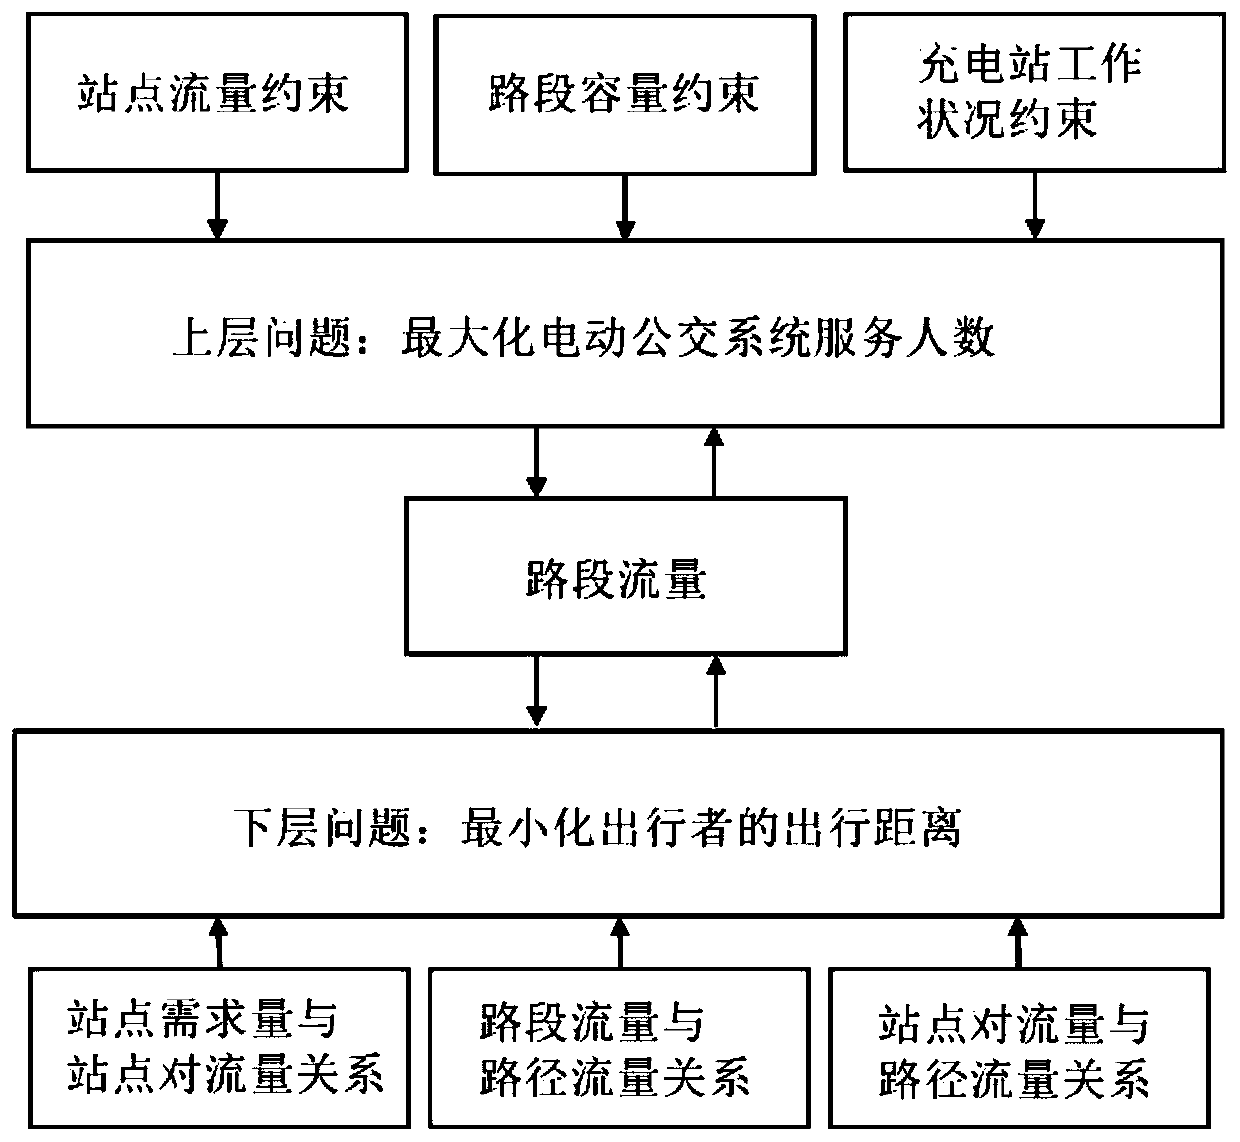 A Reliability Evaluation Method for Electric Bus Network Based on Network Bearing Capacity